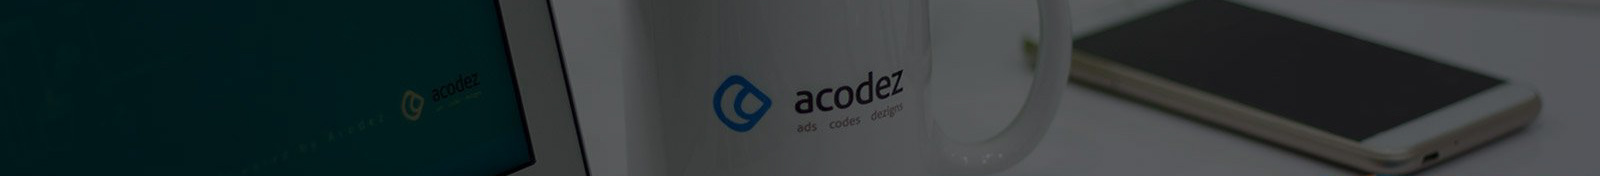 Acodez IT Solutions's profile banner